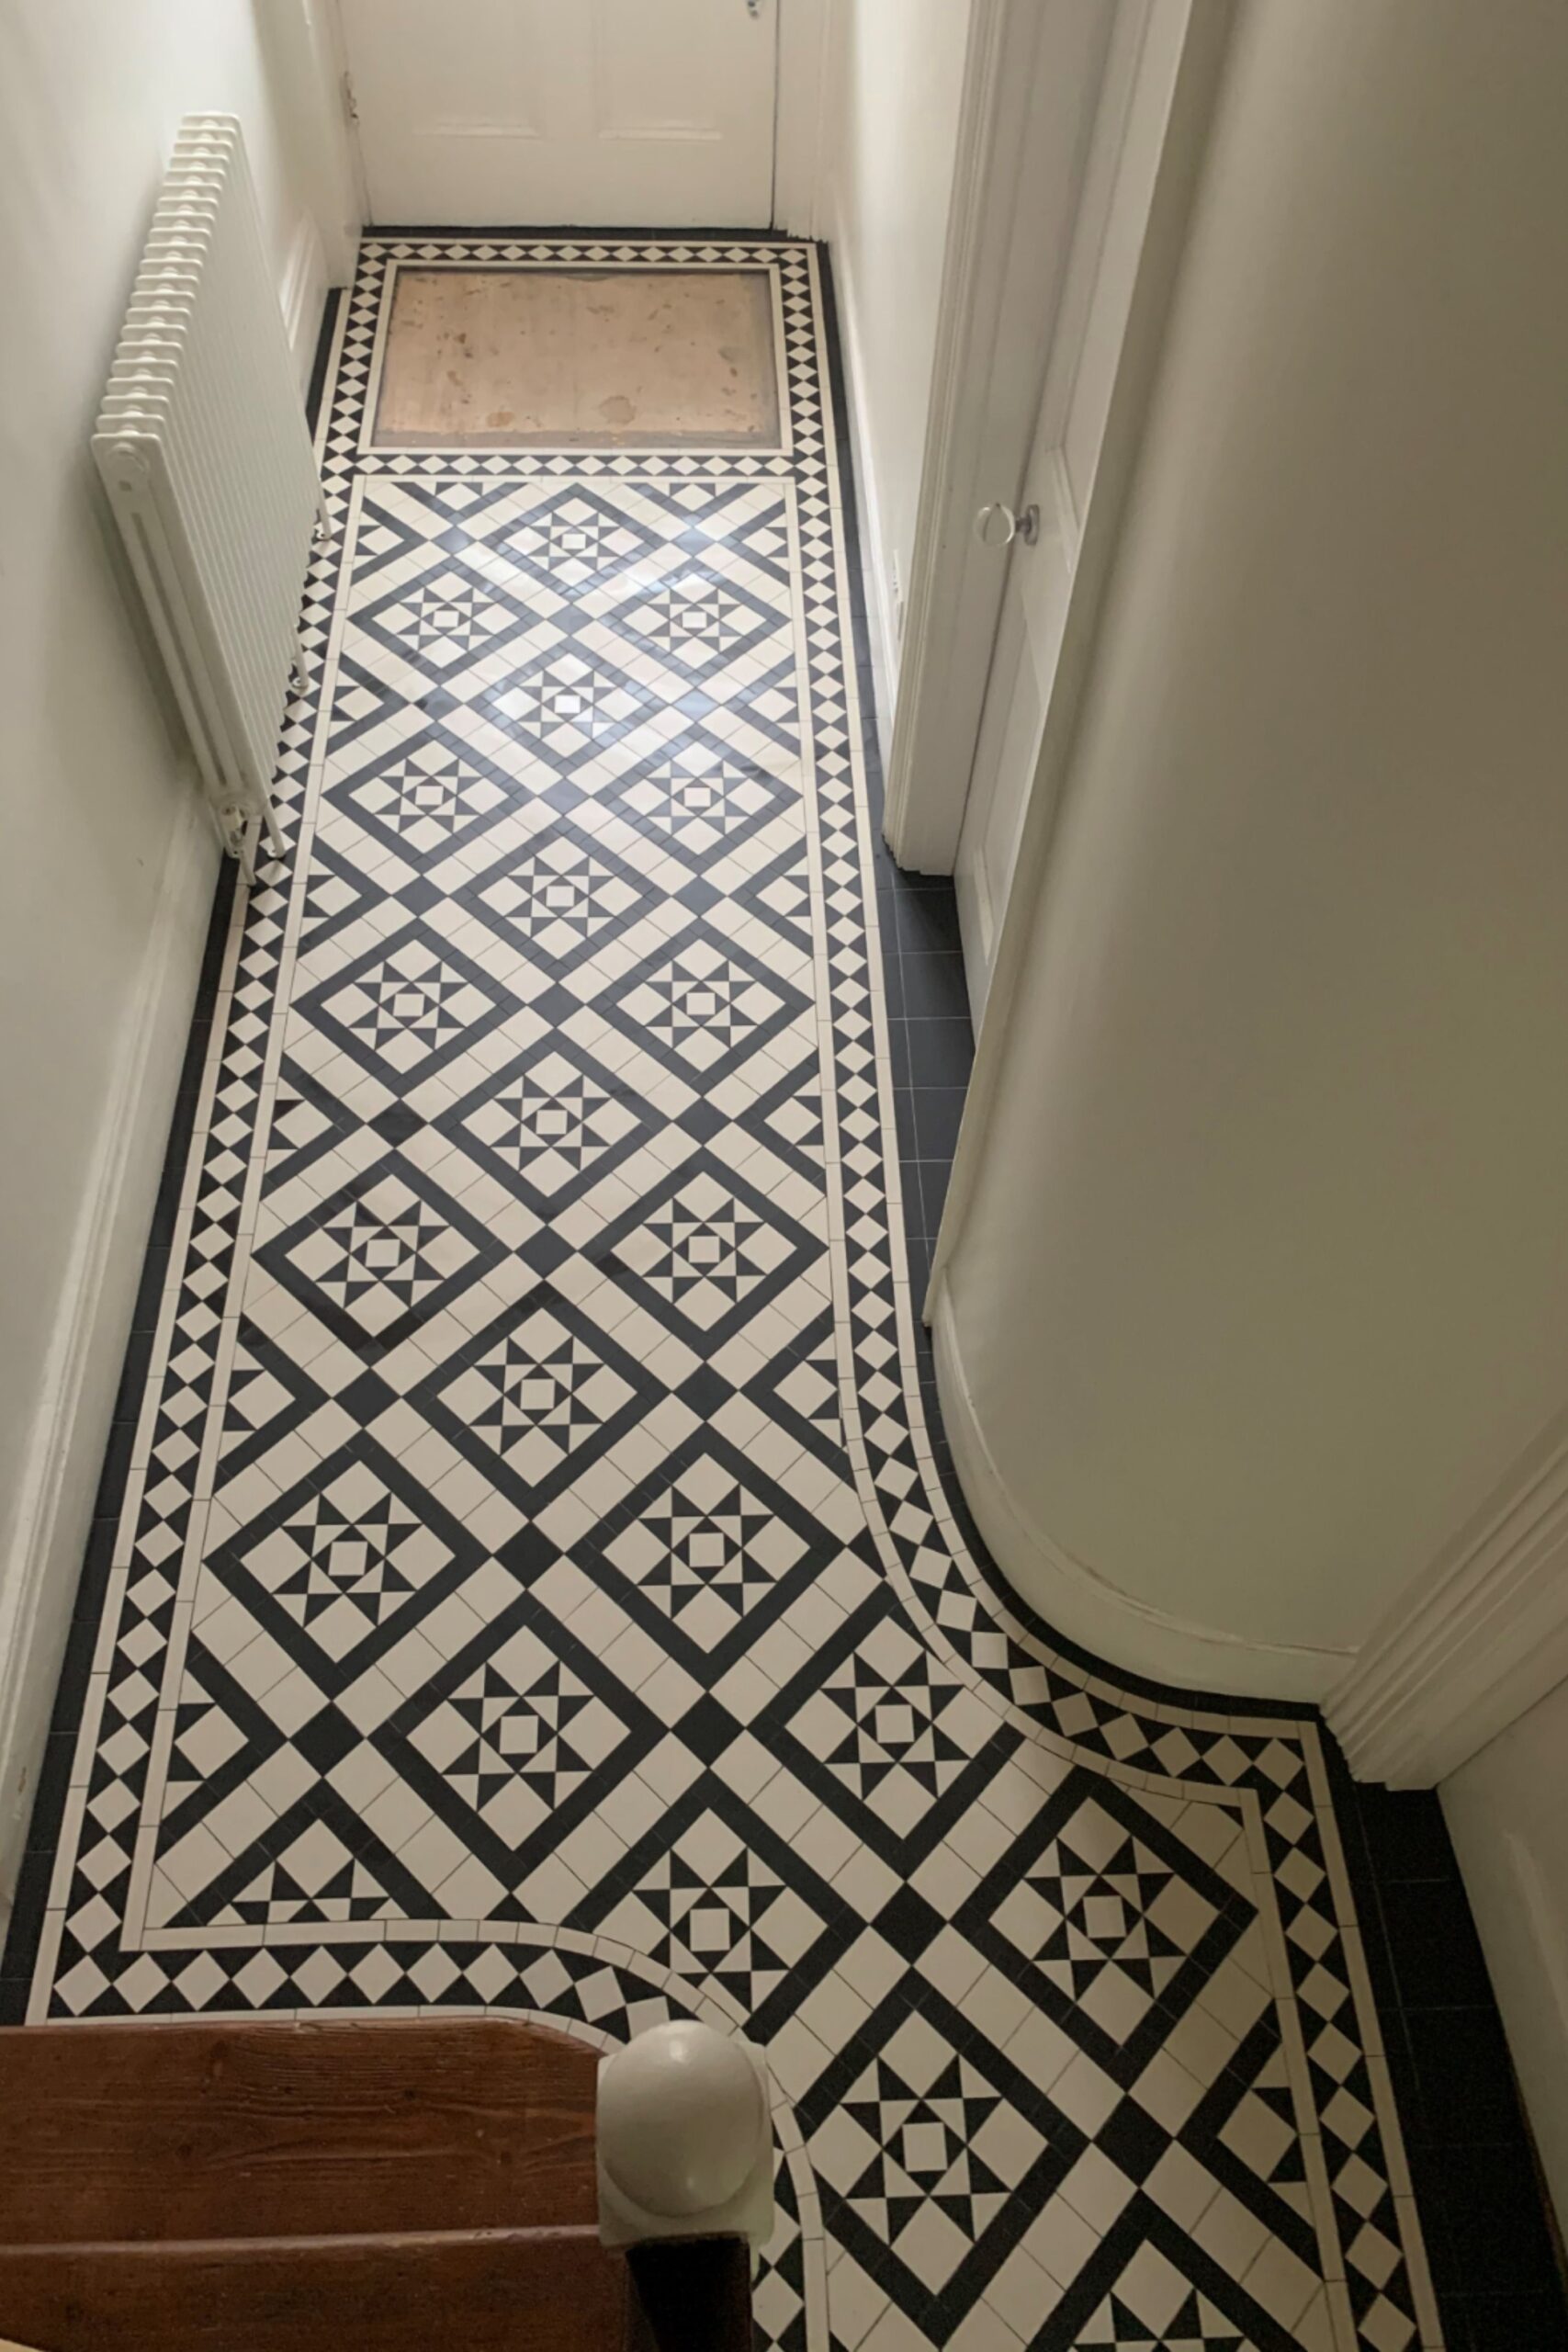 Stylish Floor Tiles Designs for Any Room in Your Home